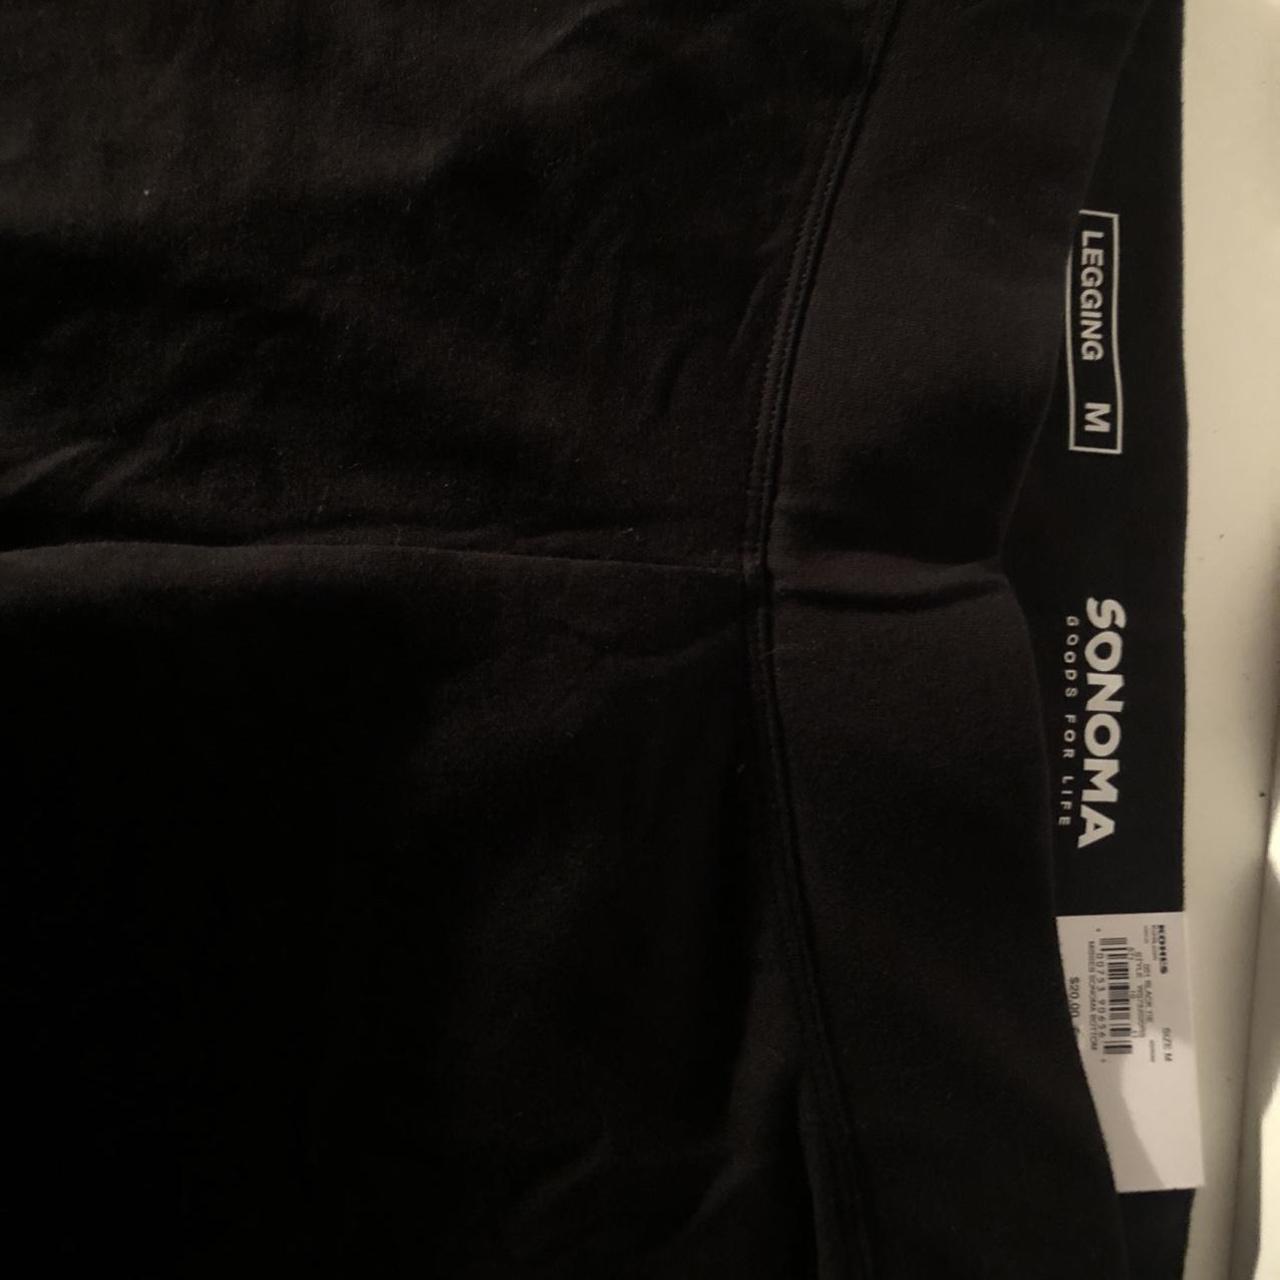 Brand new with tags Sonoma Black cotton leggings.